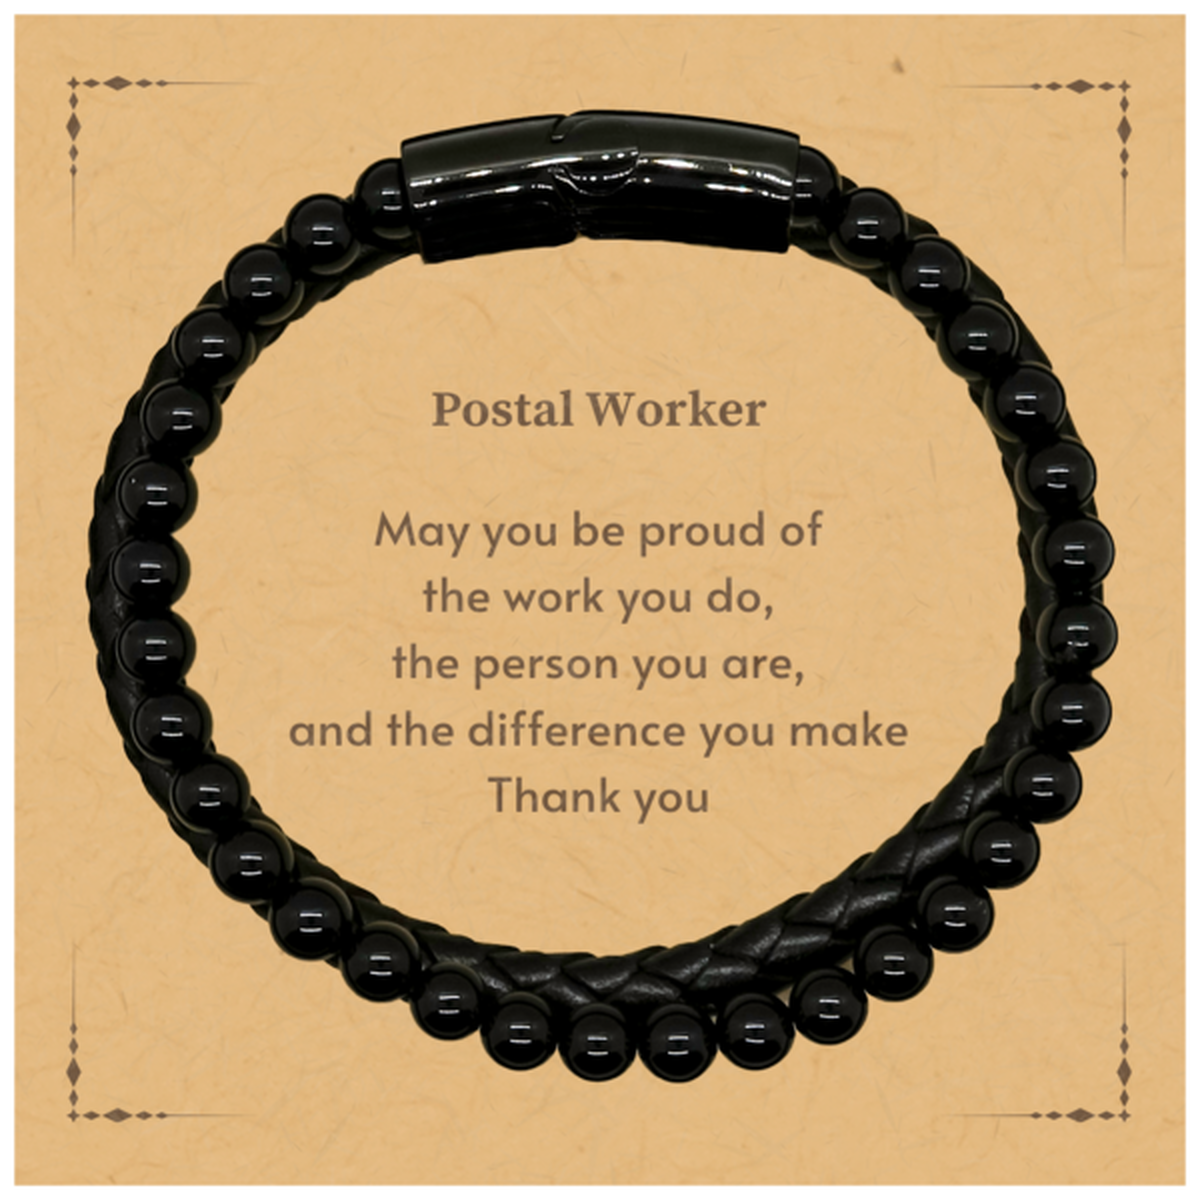 Heartwarming Stone Leather Bracelets Retirement Coworkers Gifts for Postal Worker, Postal Worker May You be proud of the work you do, the person you are Gifts for Boss Men Women Friends